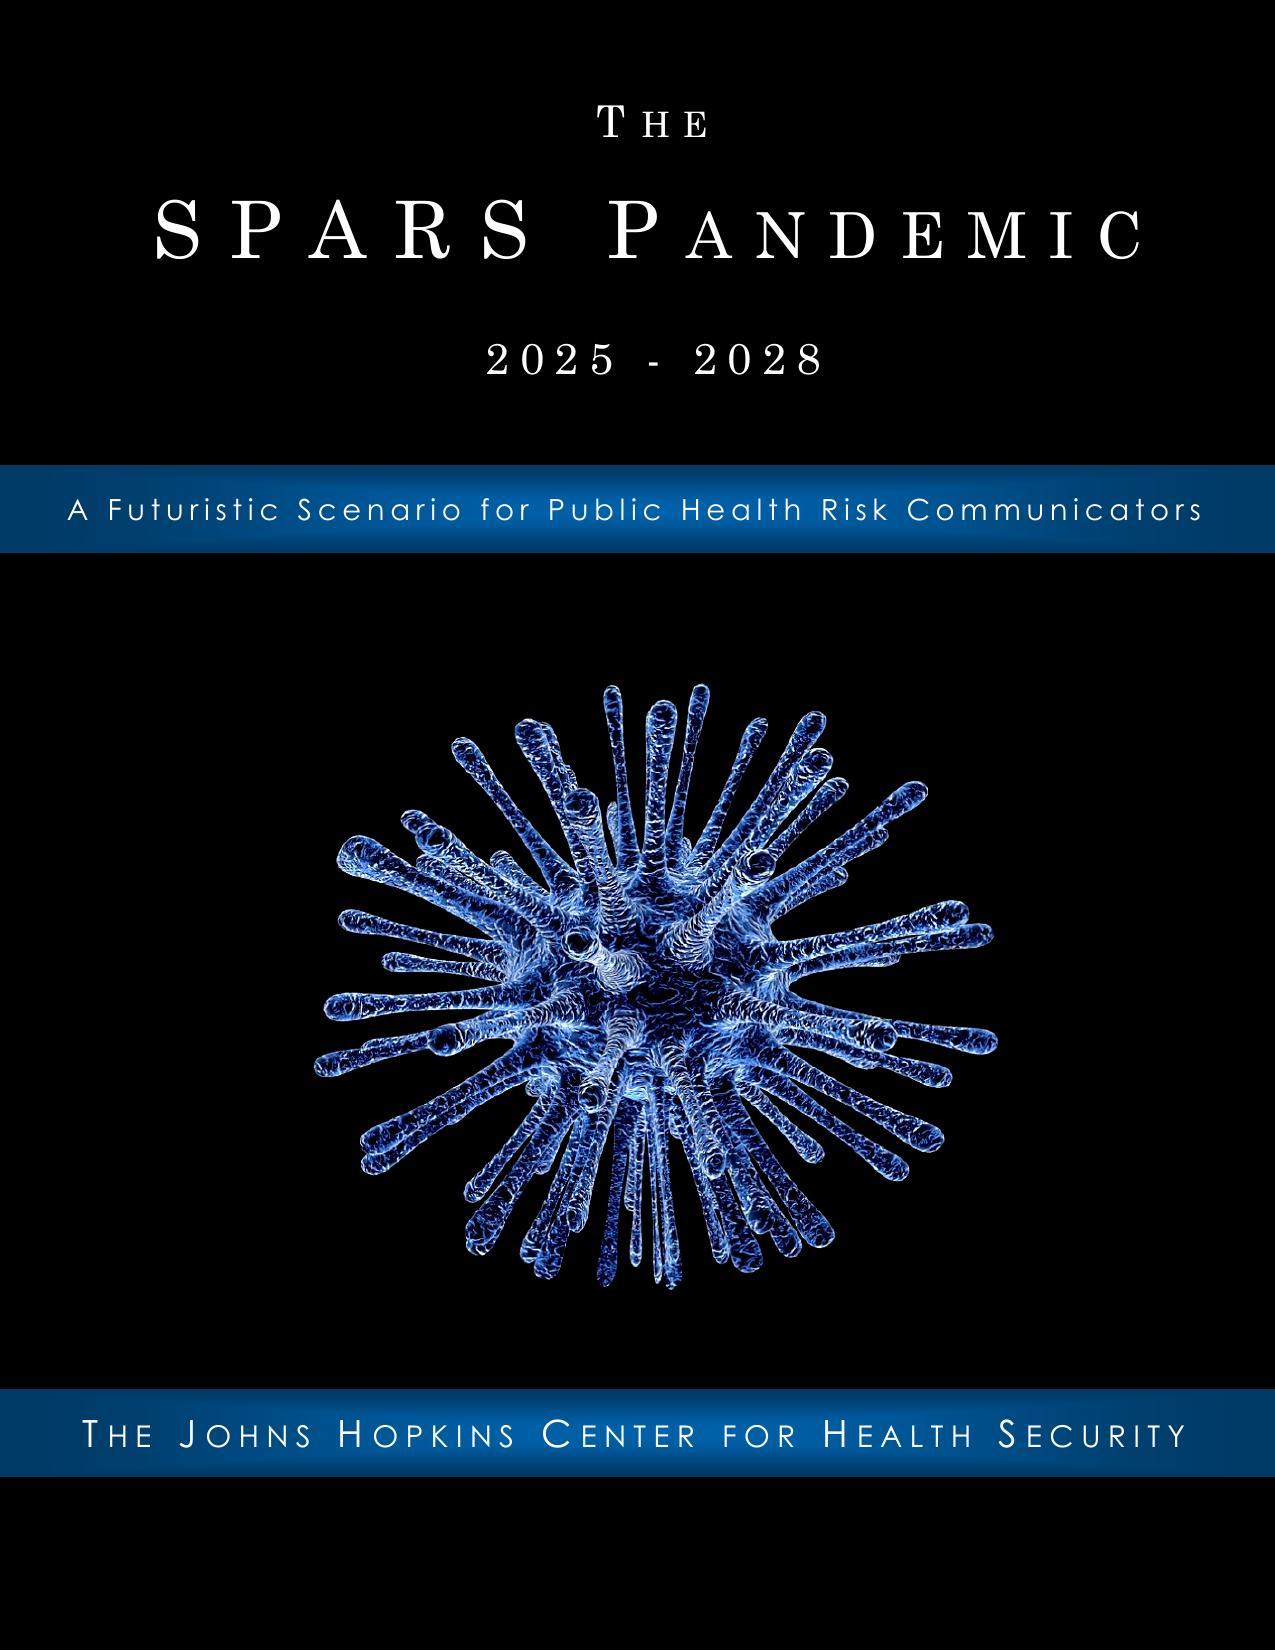 The Spars Pandemic 2025-2028: A Futuristic Scenario for Public Health Risk Communications (2017) by Johns Hopkins School